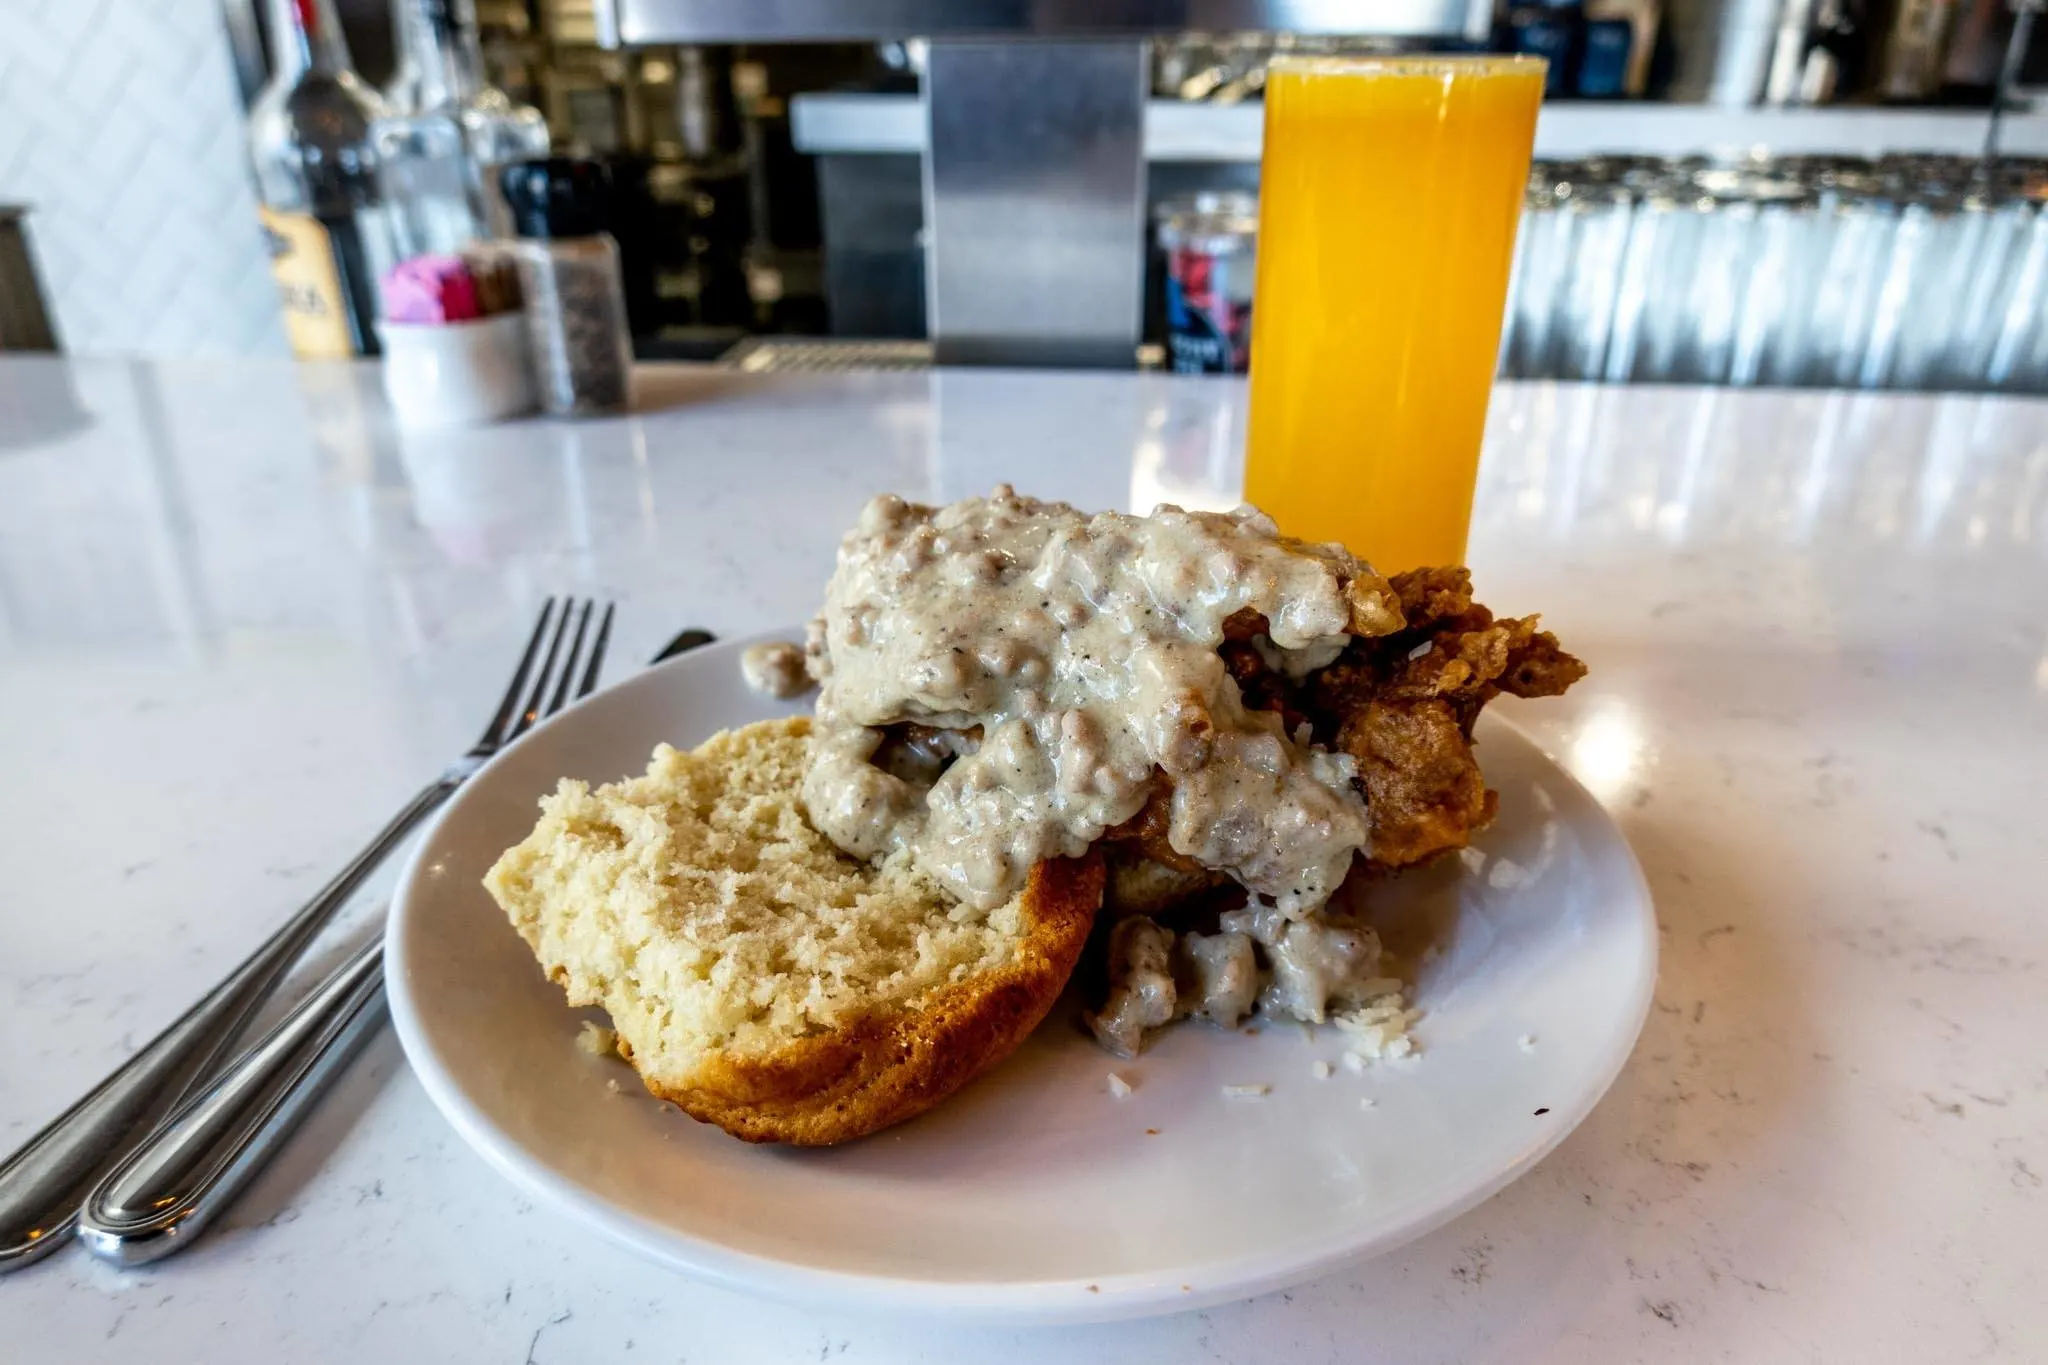 Orange juice and biscuit topped with chicken and gravy